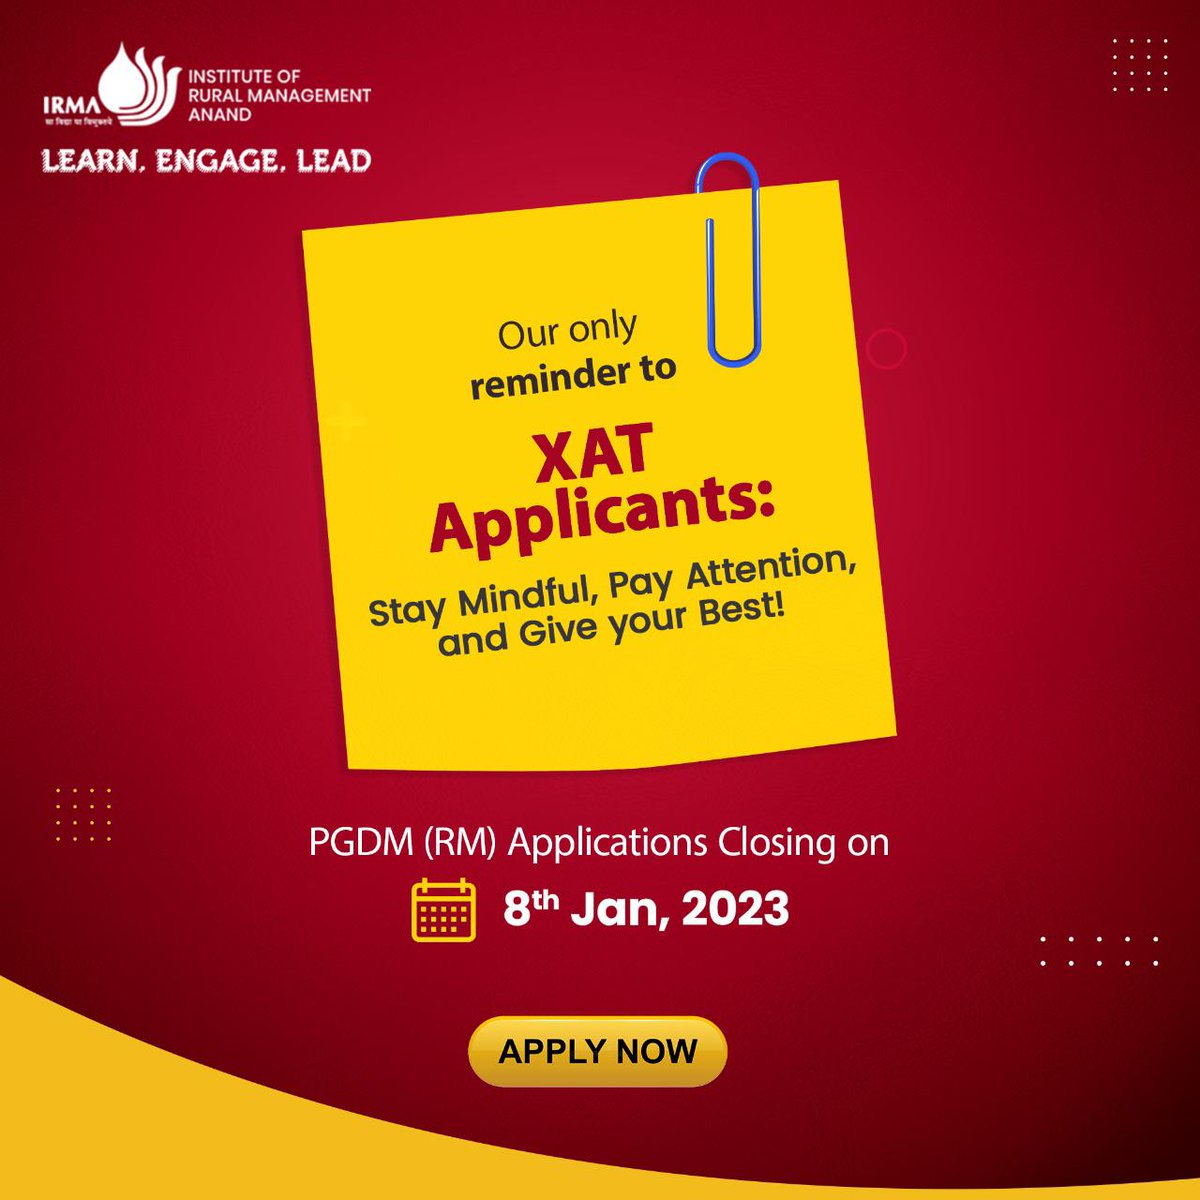 Good luck for your XAT exam. Here’s how you can plan for a future that serves a higher purpose:

Step 1: Apply to IRMA!
Step 2: Ace your XAT!
Step 3: Achieve your dreams!

Applications are closing on 8th January, 2023. Apply here: bit.ly/3FJQ9bC

#IRMA #ruralmanagement